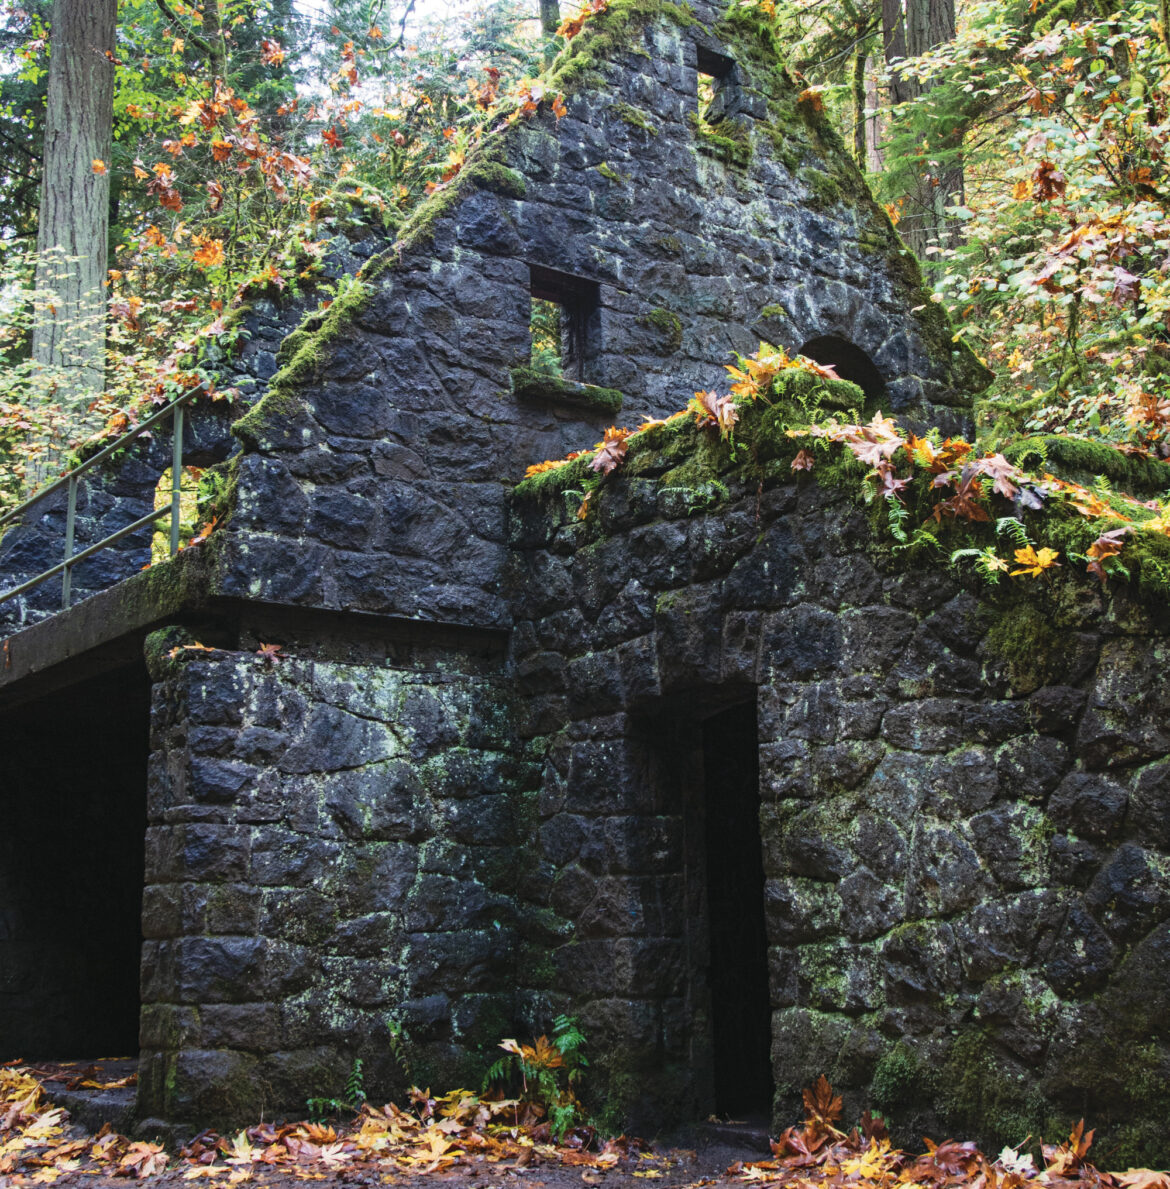 Witch’s Castle in Forest Park is a creepy symbol of a creepy seduction and subsequent murder.